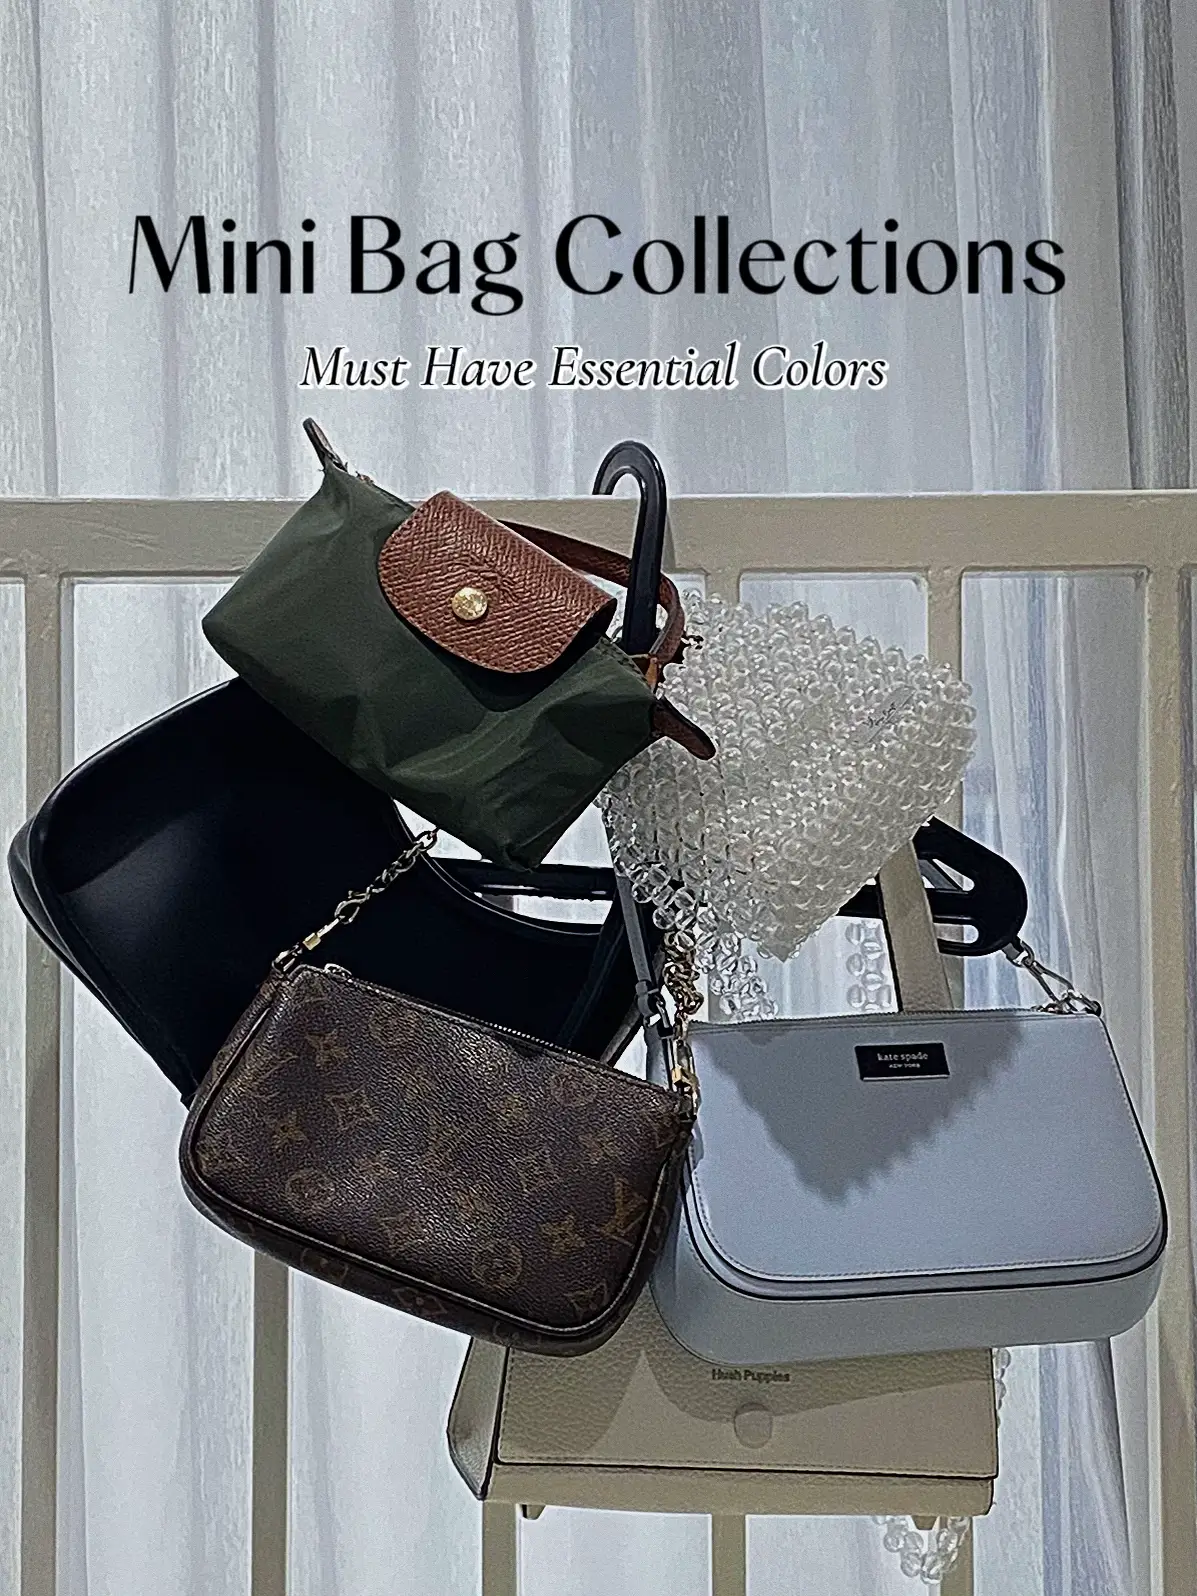 part 1 of my designer bag collection #designerbagcollection